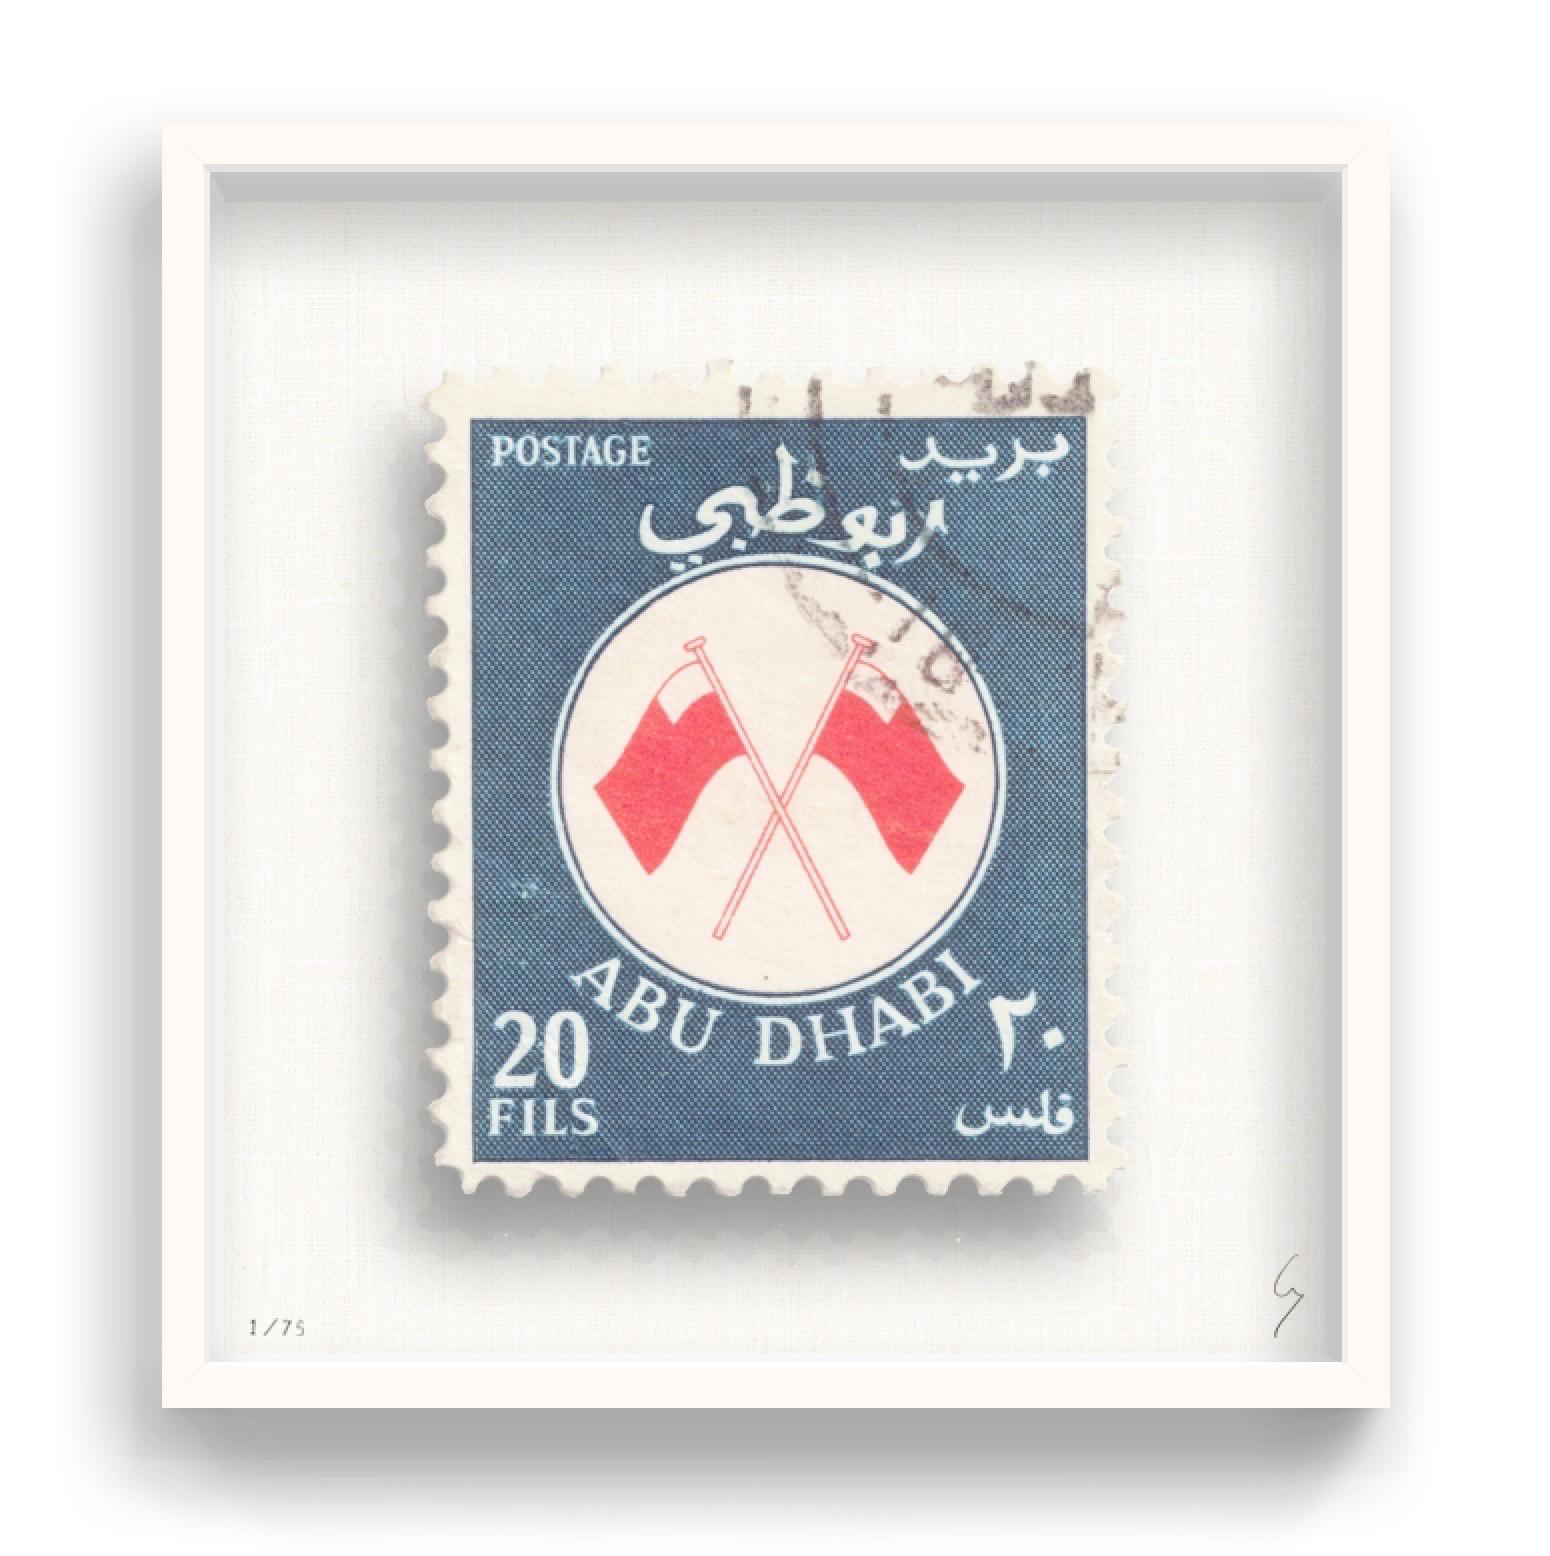 Guy Gee, Abu Dhabi (medium)

Hand-engraved print on 350gsm on G.F Smith card
53 x 56cm (20 4/5 x 22 2/5 in)
Frame included 
Edition of 75 

Each artwork by Guy had been digitally reimagined from an original postage stamp. Cut out and finished by